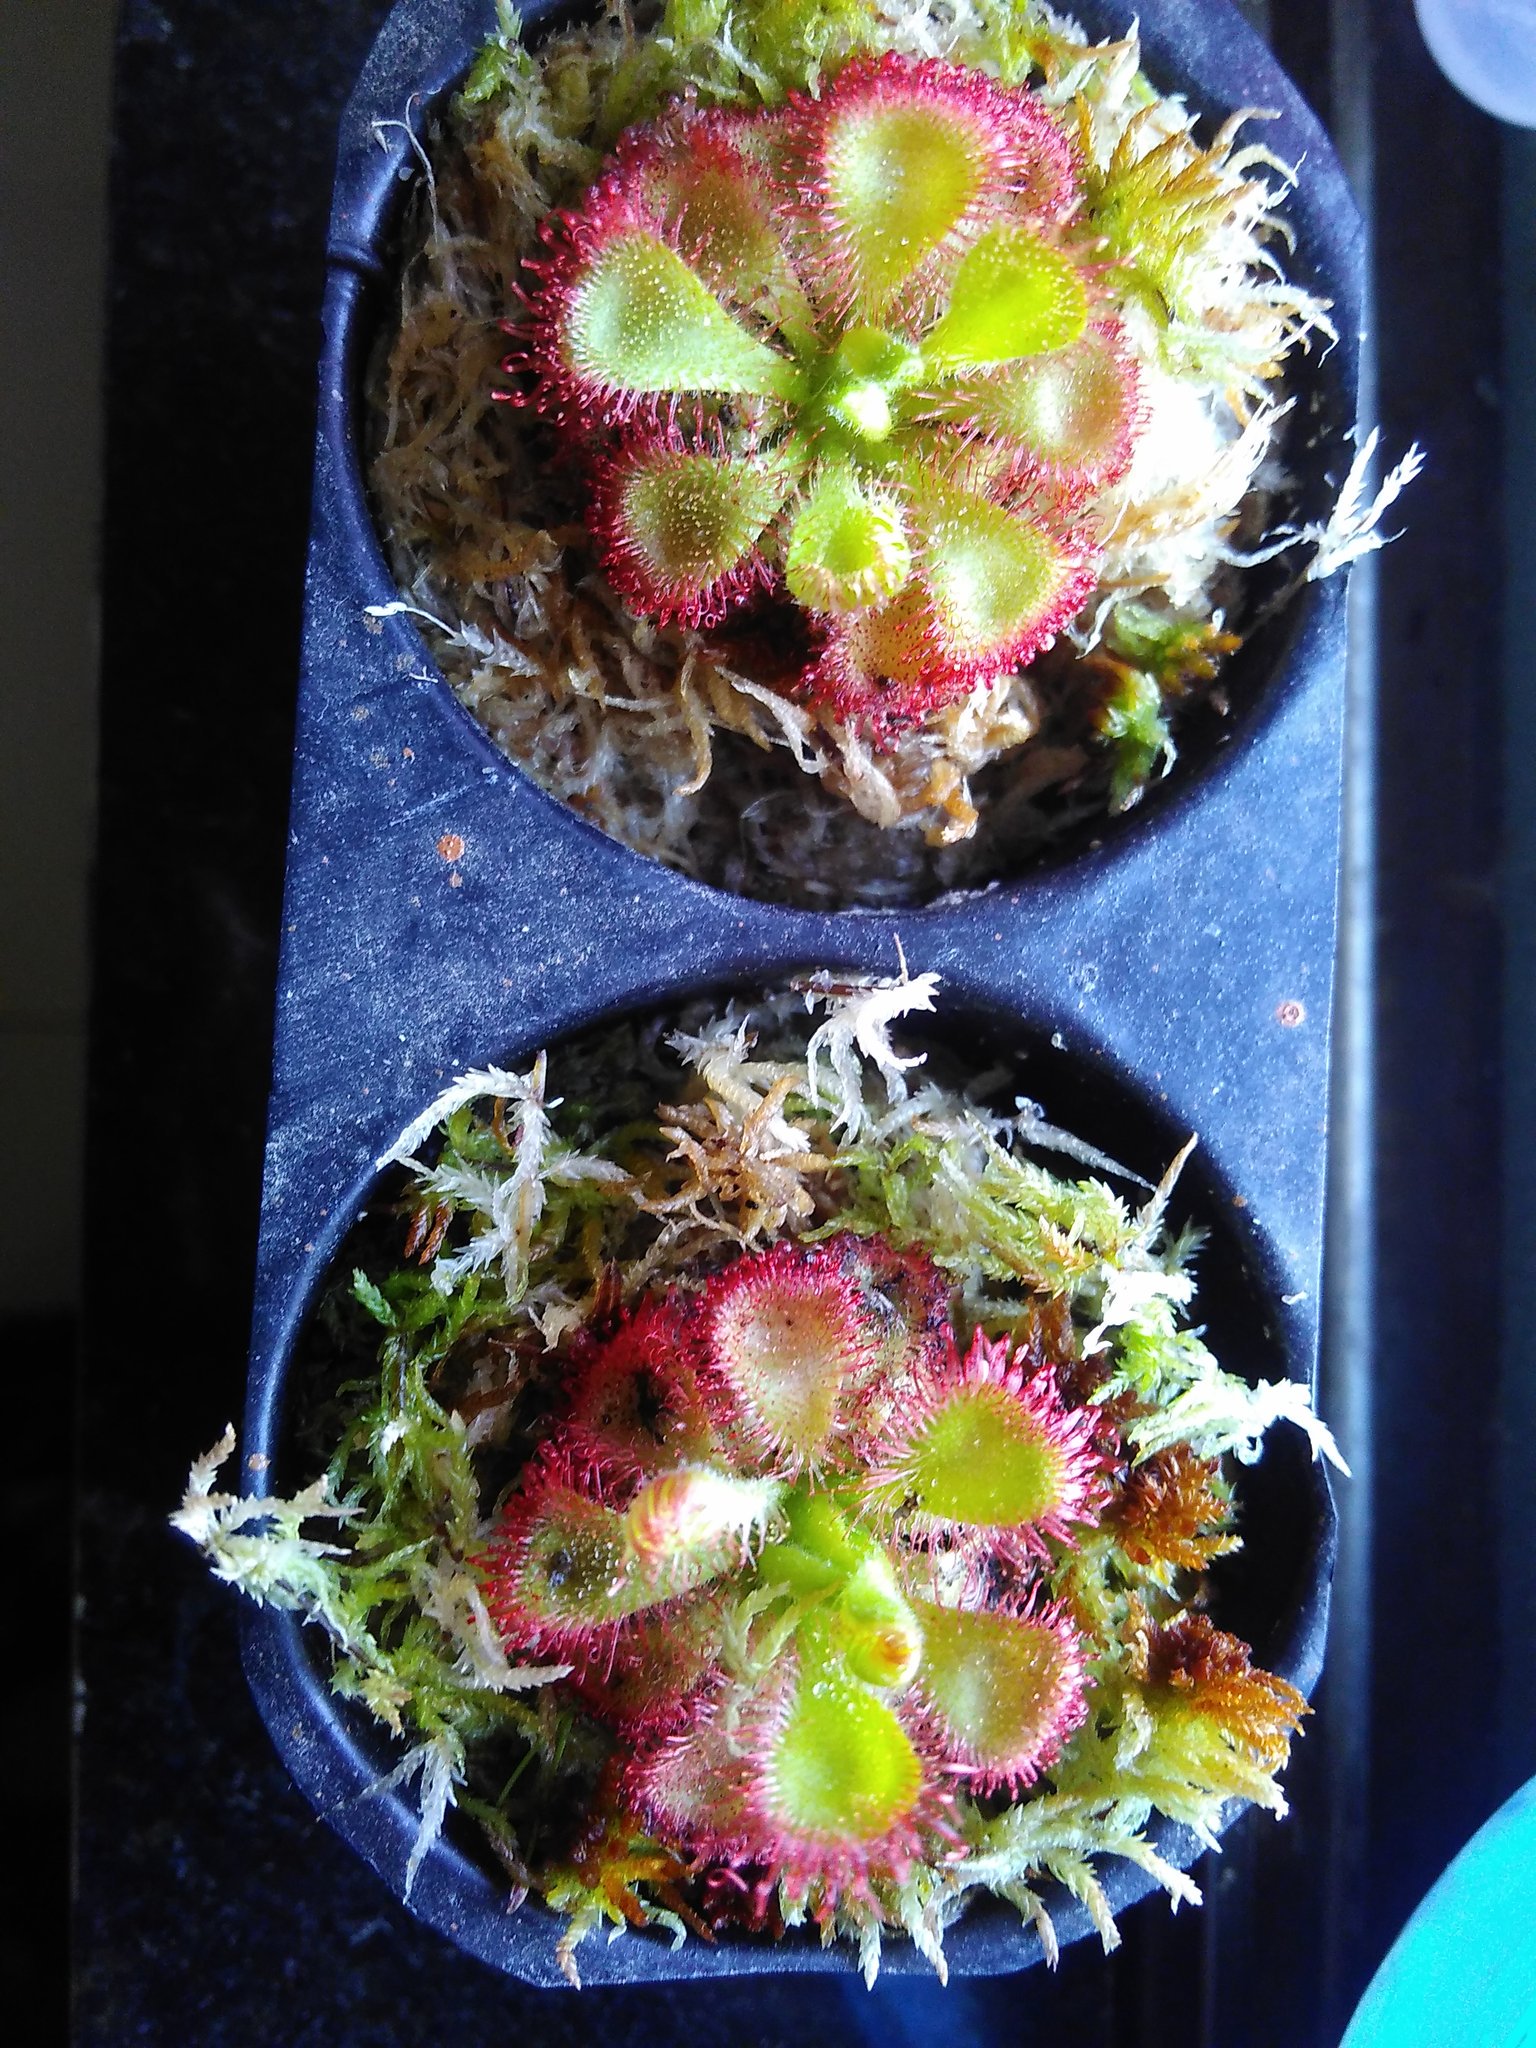 Drosera burmanii can get red when not fed for a while